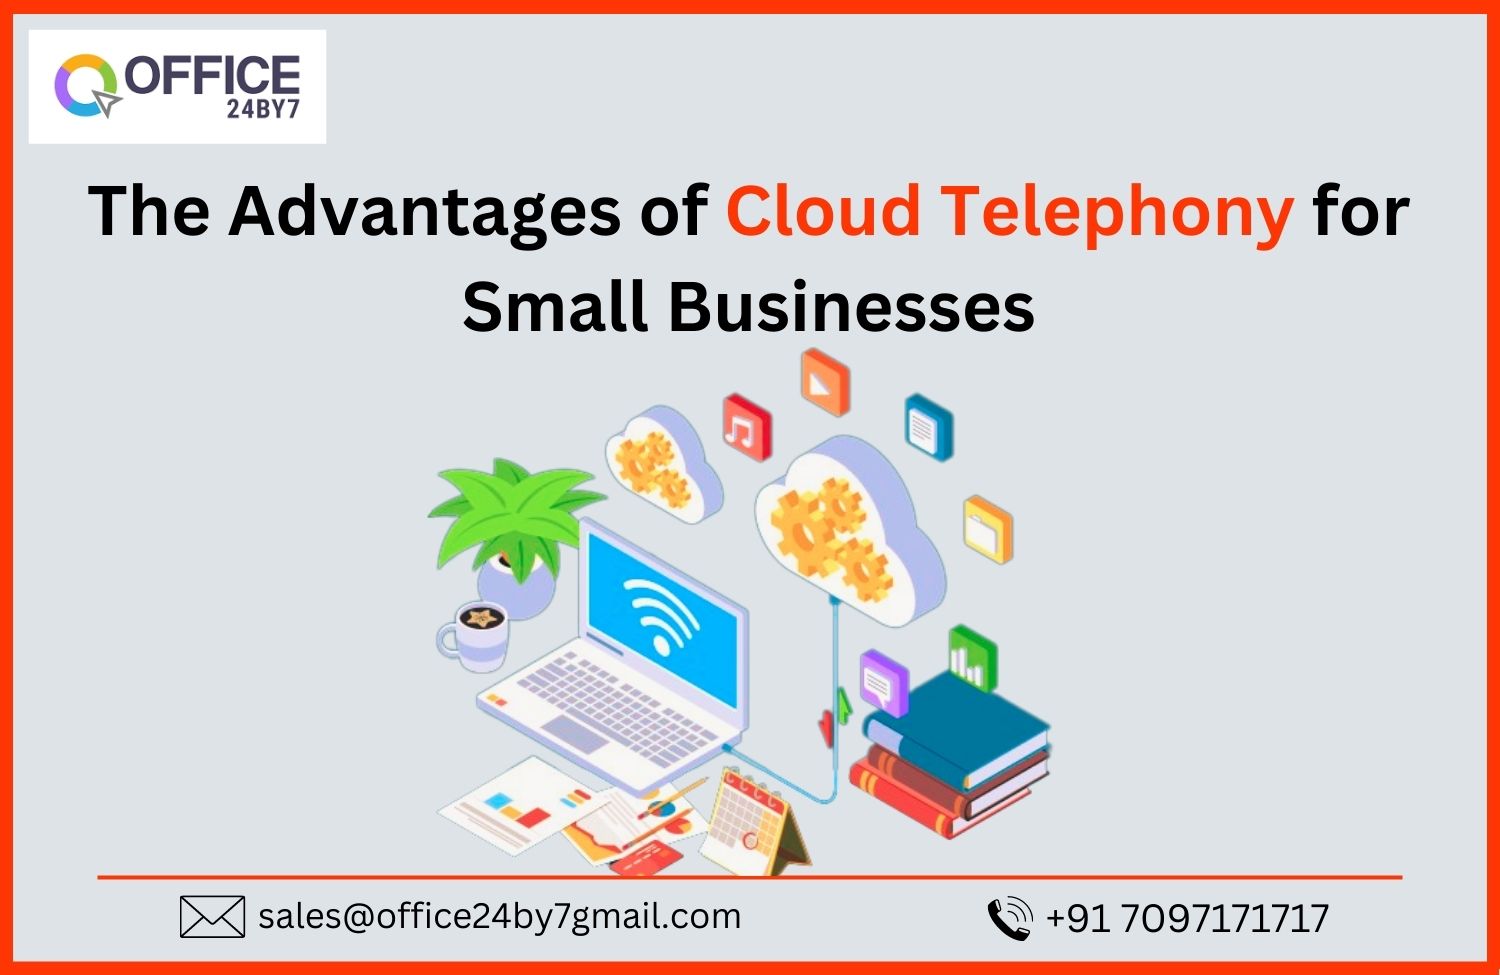 The Advantages of Cloud Telephony for Small Businesses